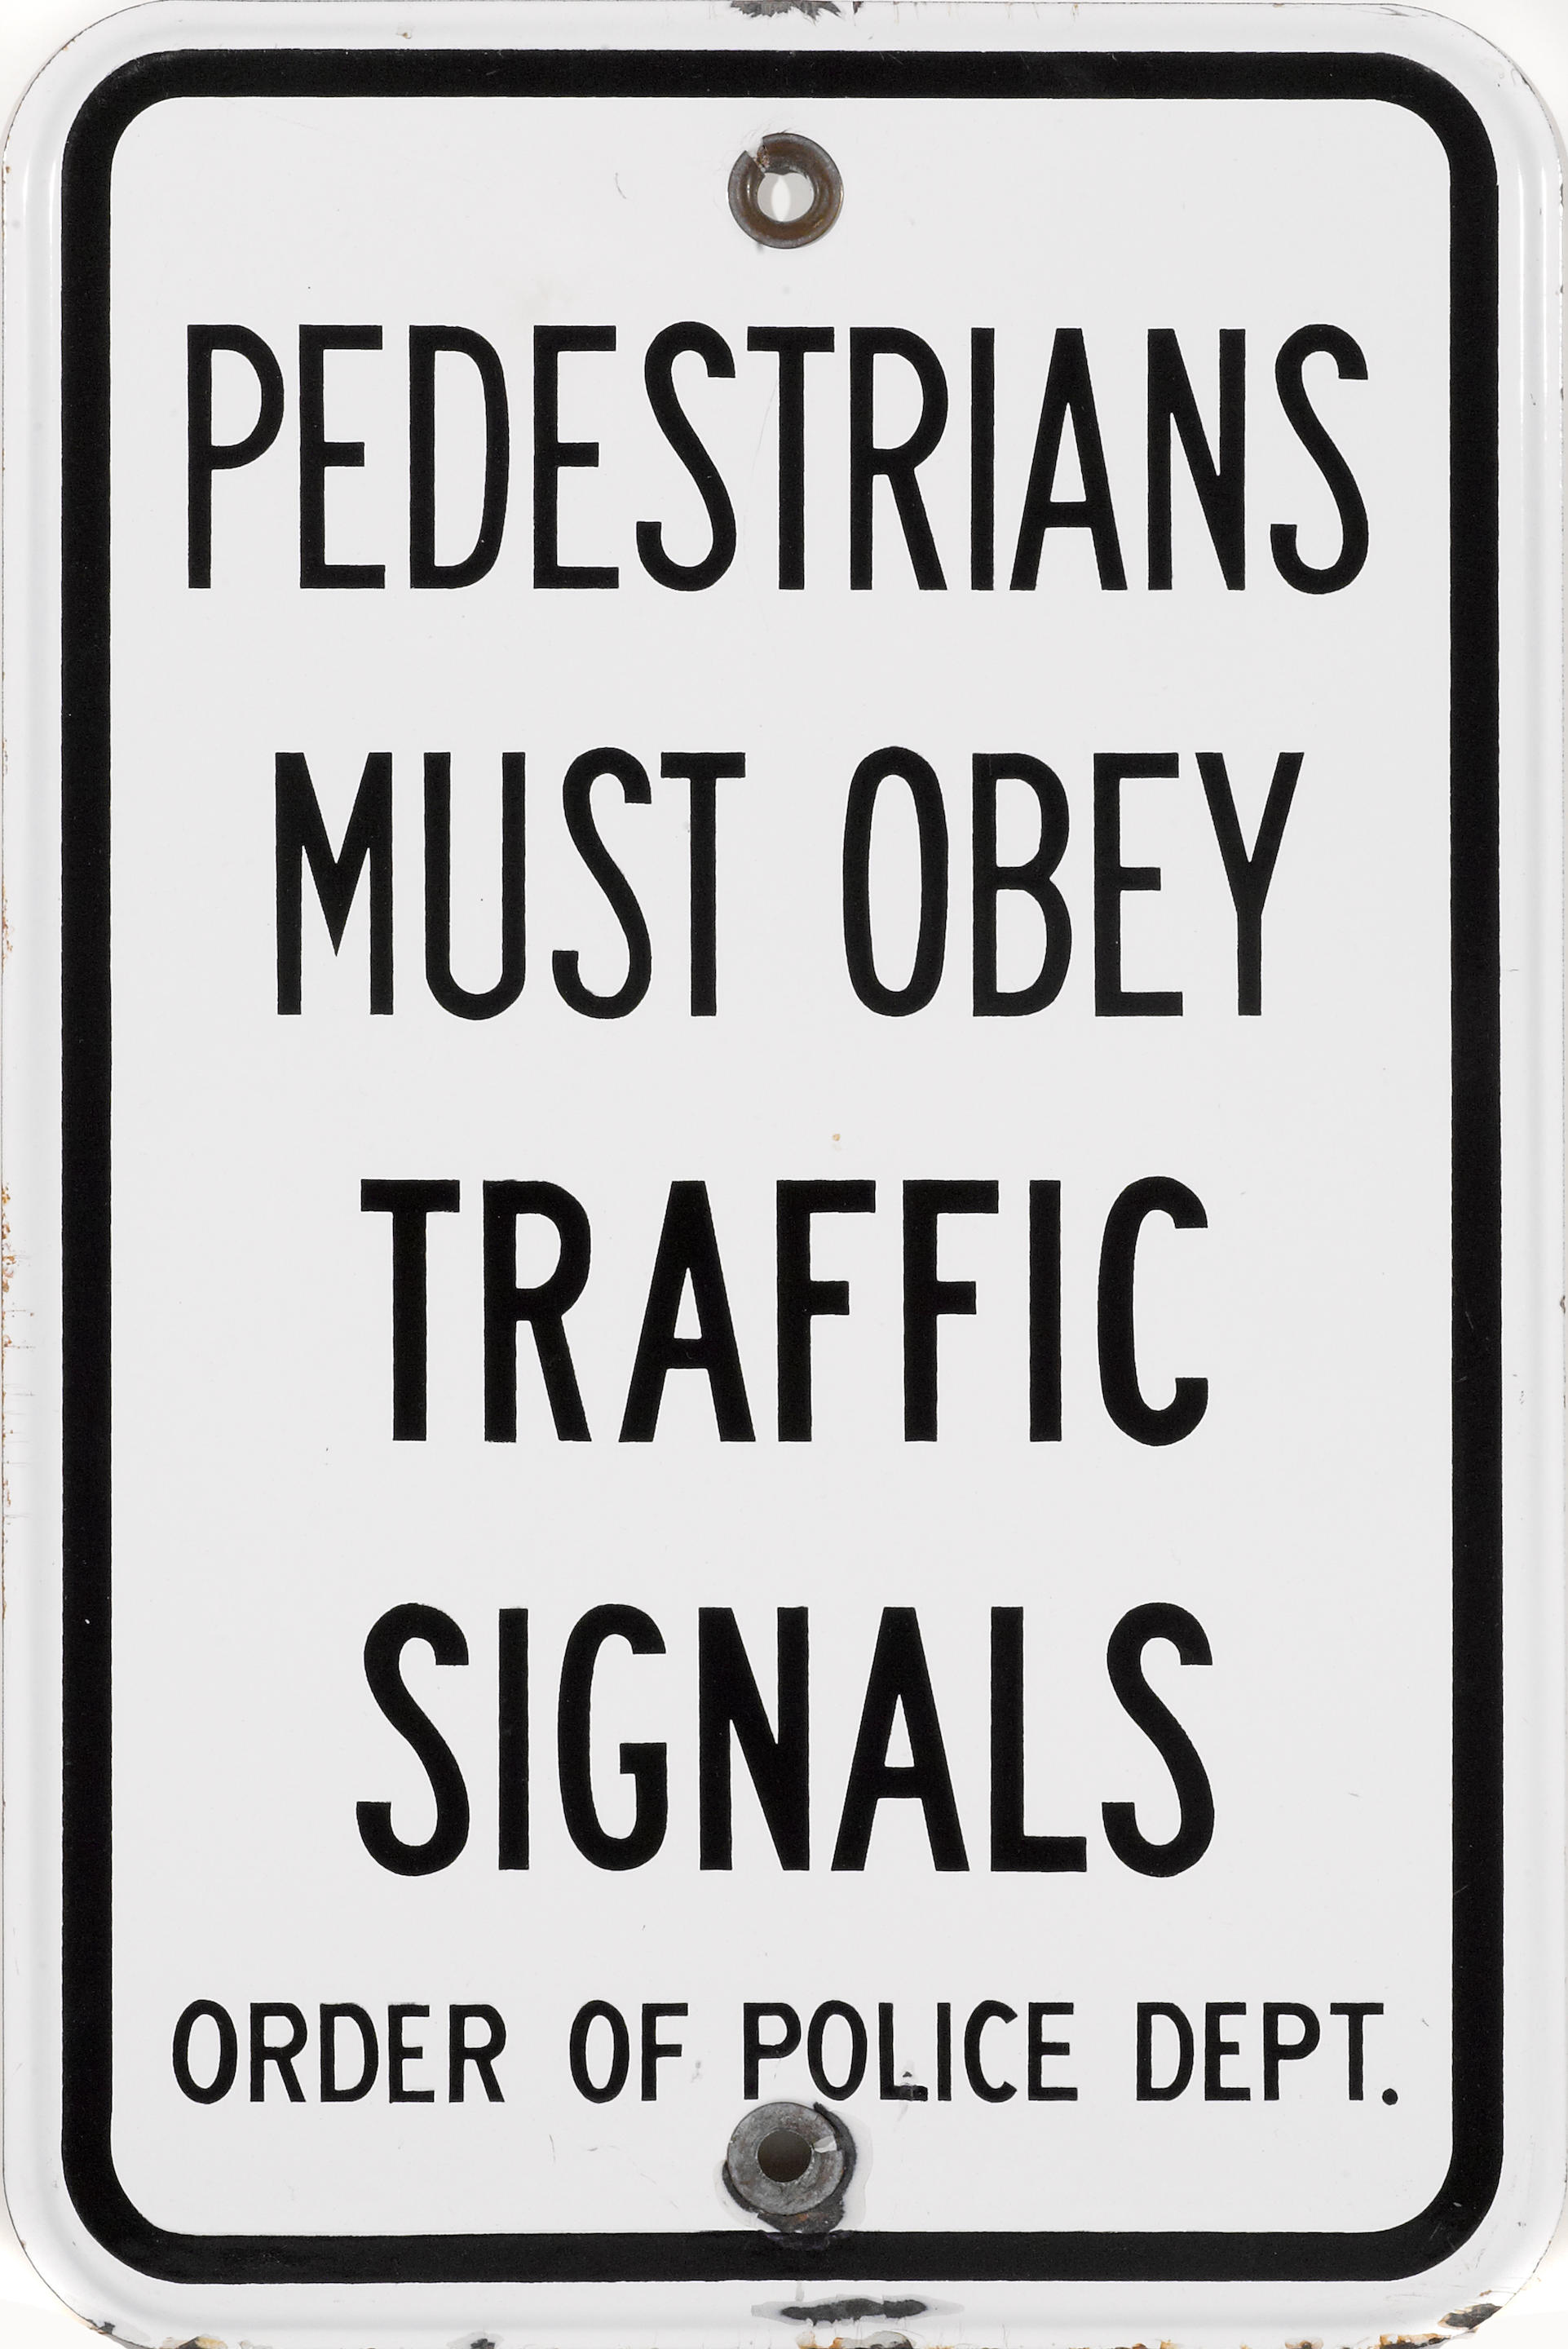 37. pedestrians and bicycle riders do not have to obey traffic signals.